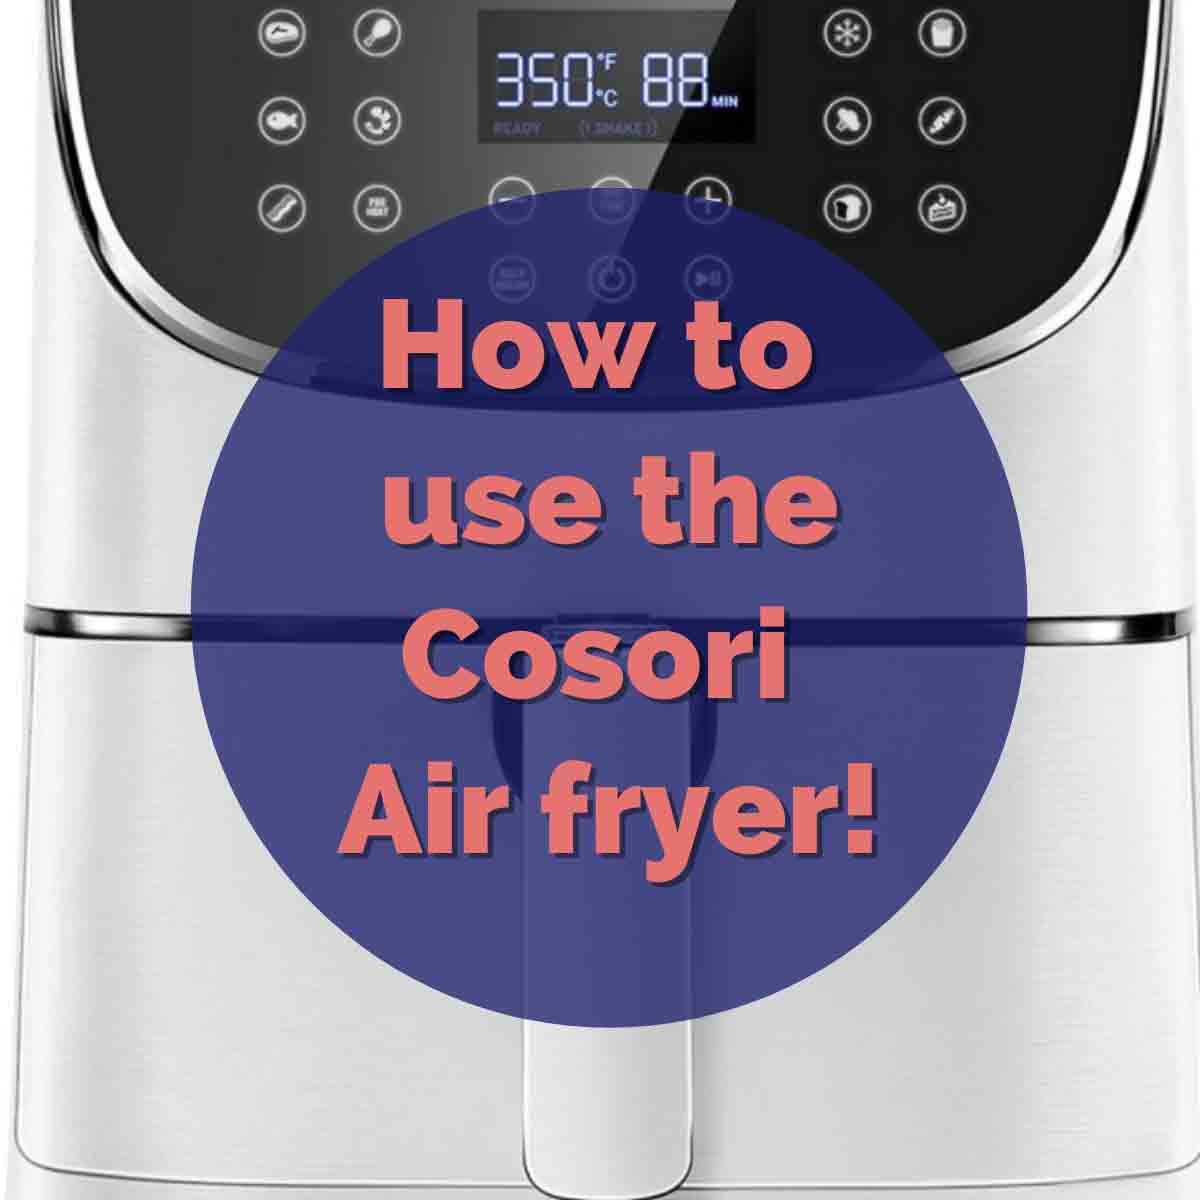 How to use Cosori Air fryer - Air Fryer Yum